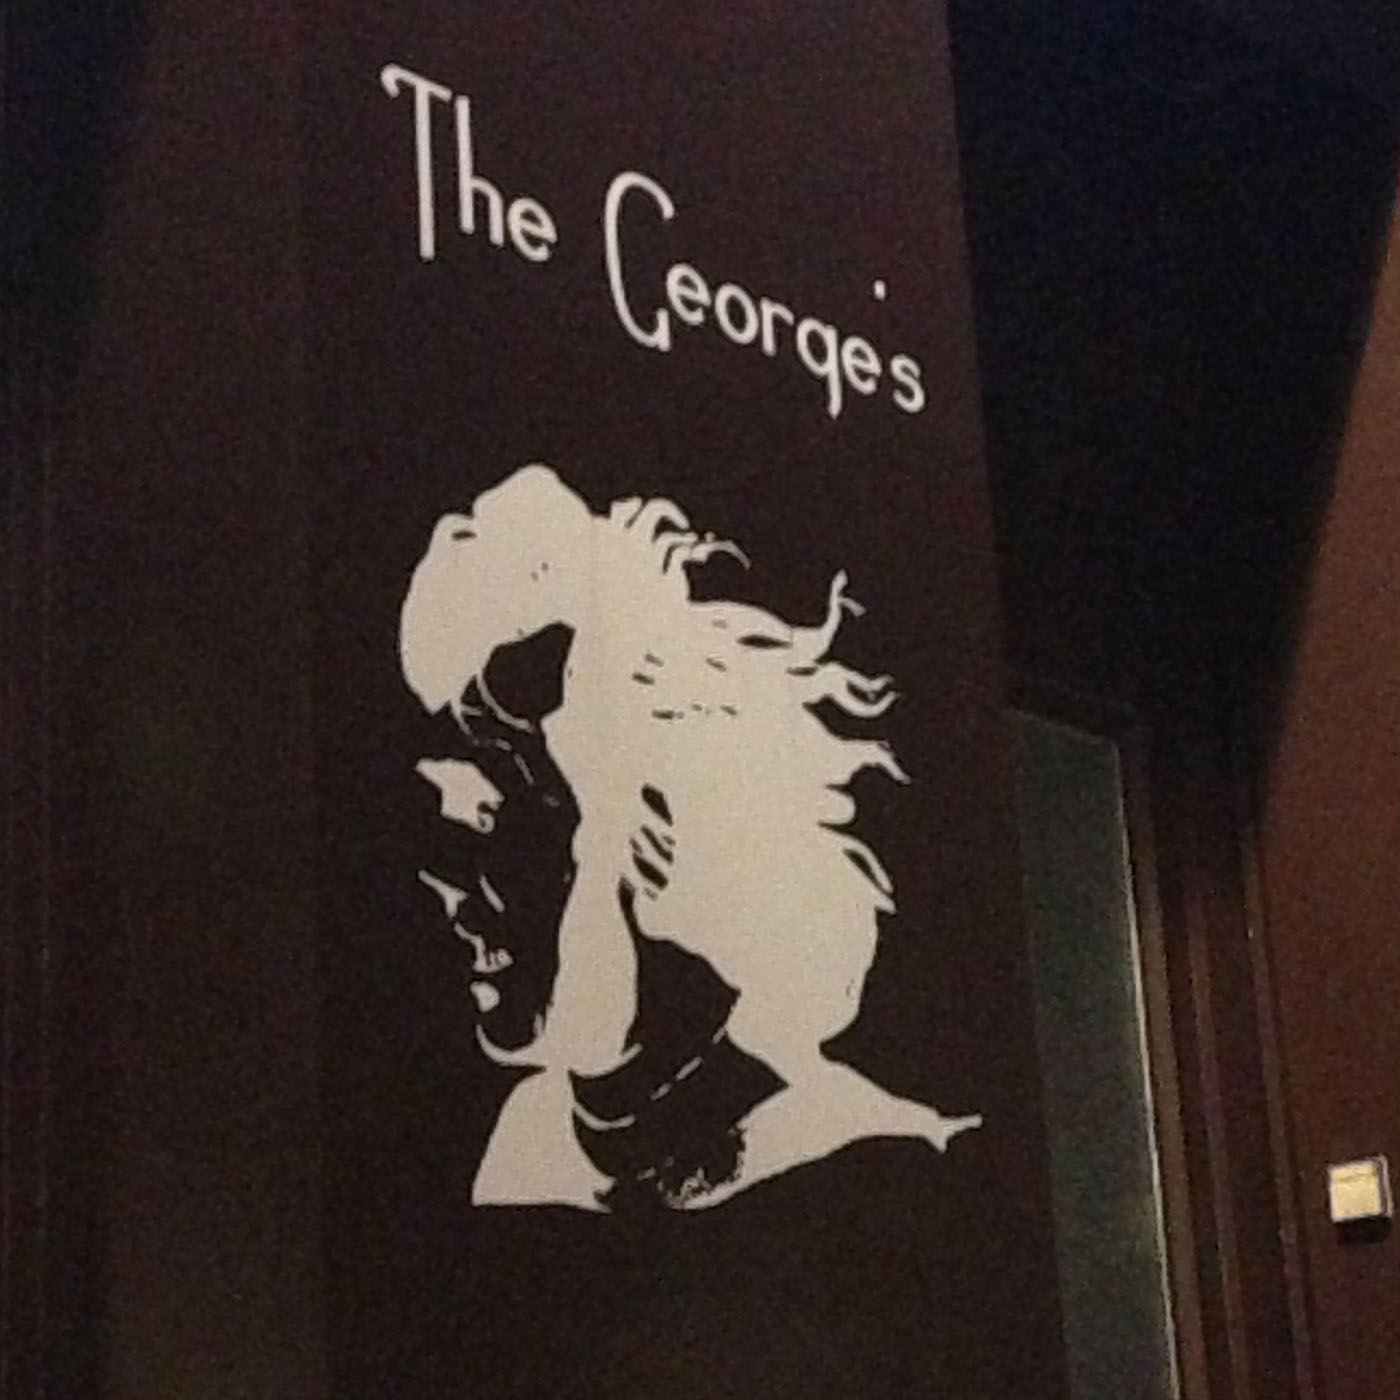 The George`s